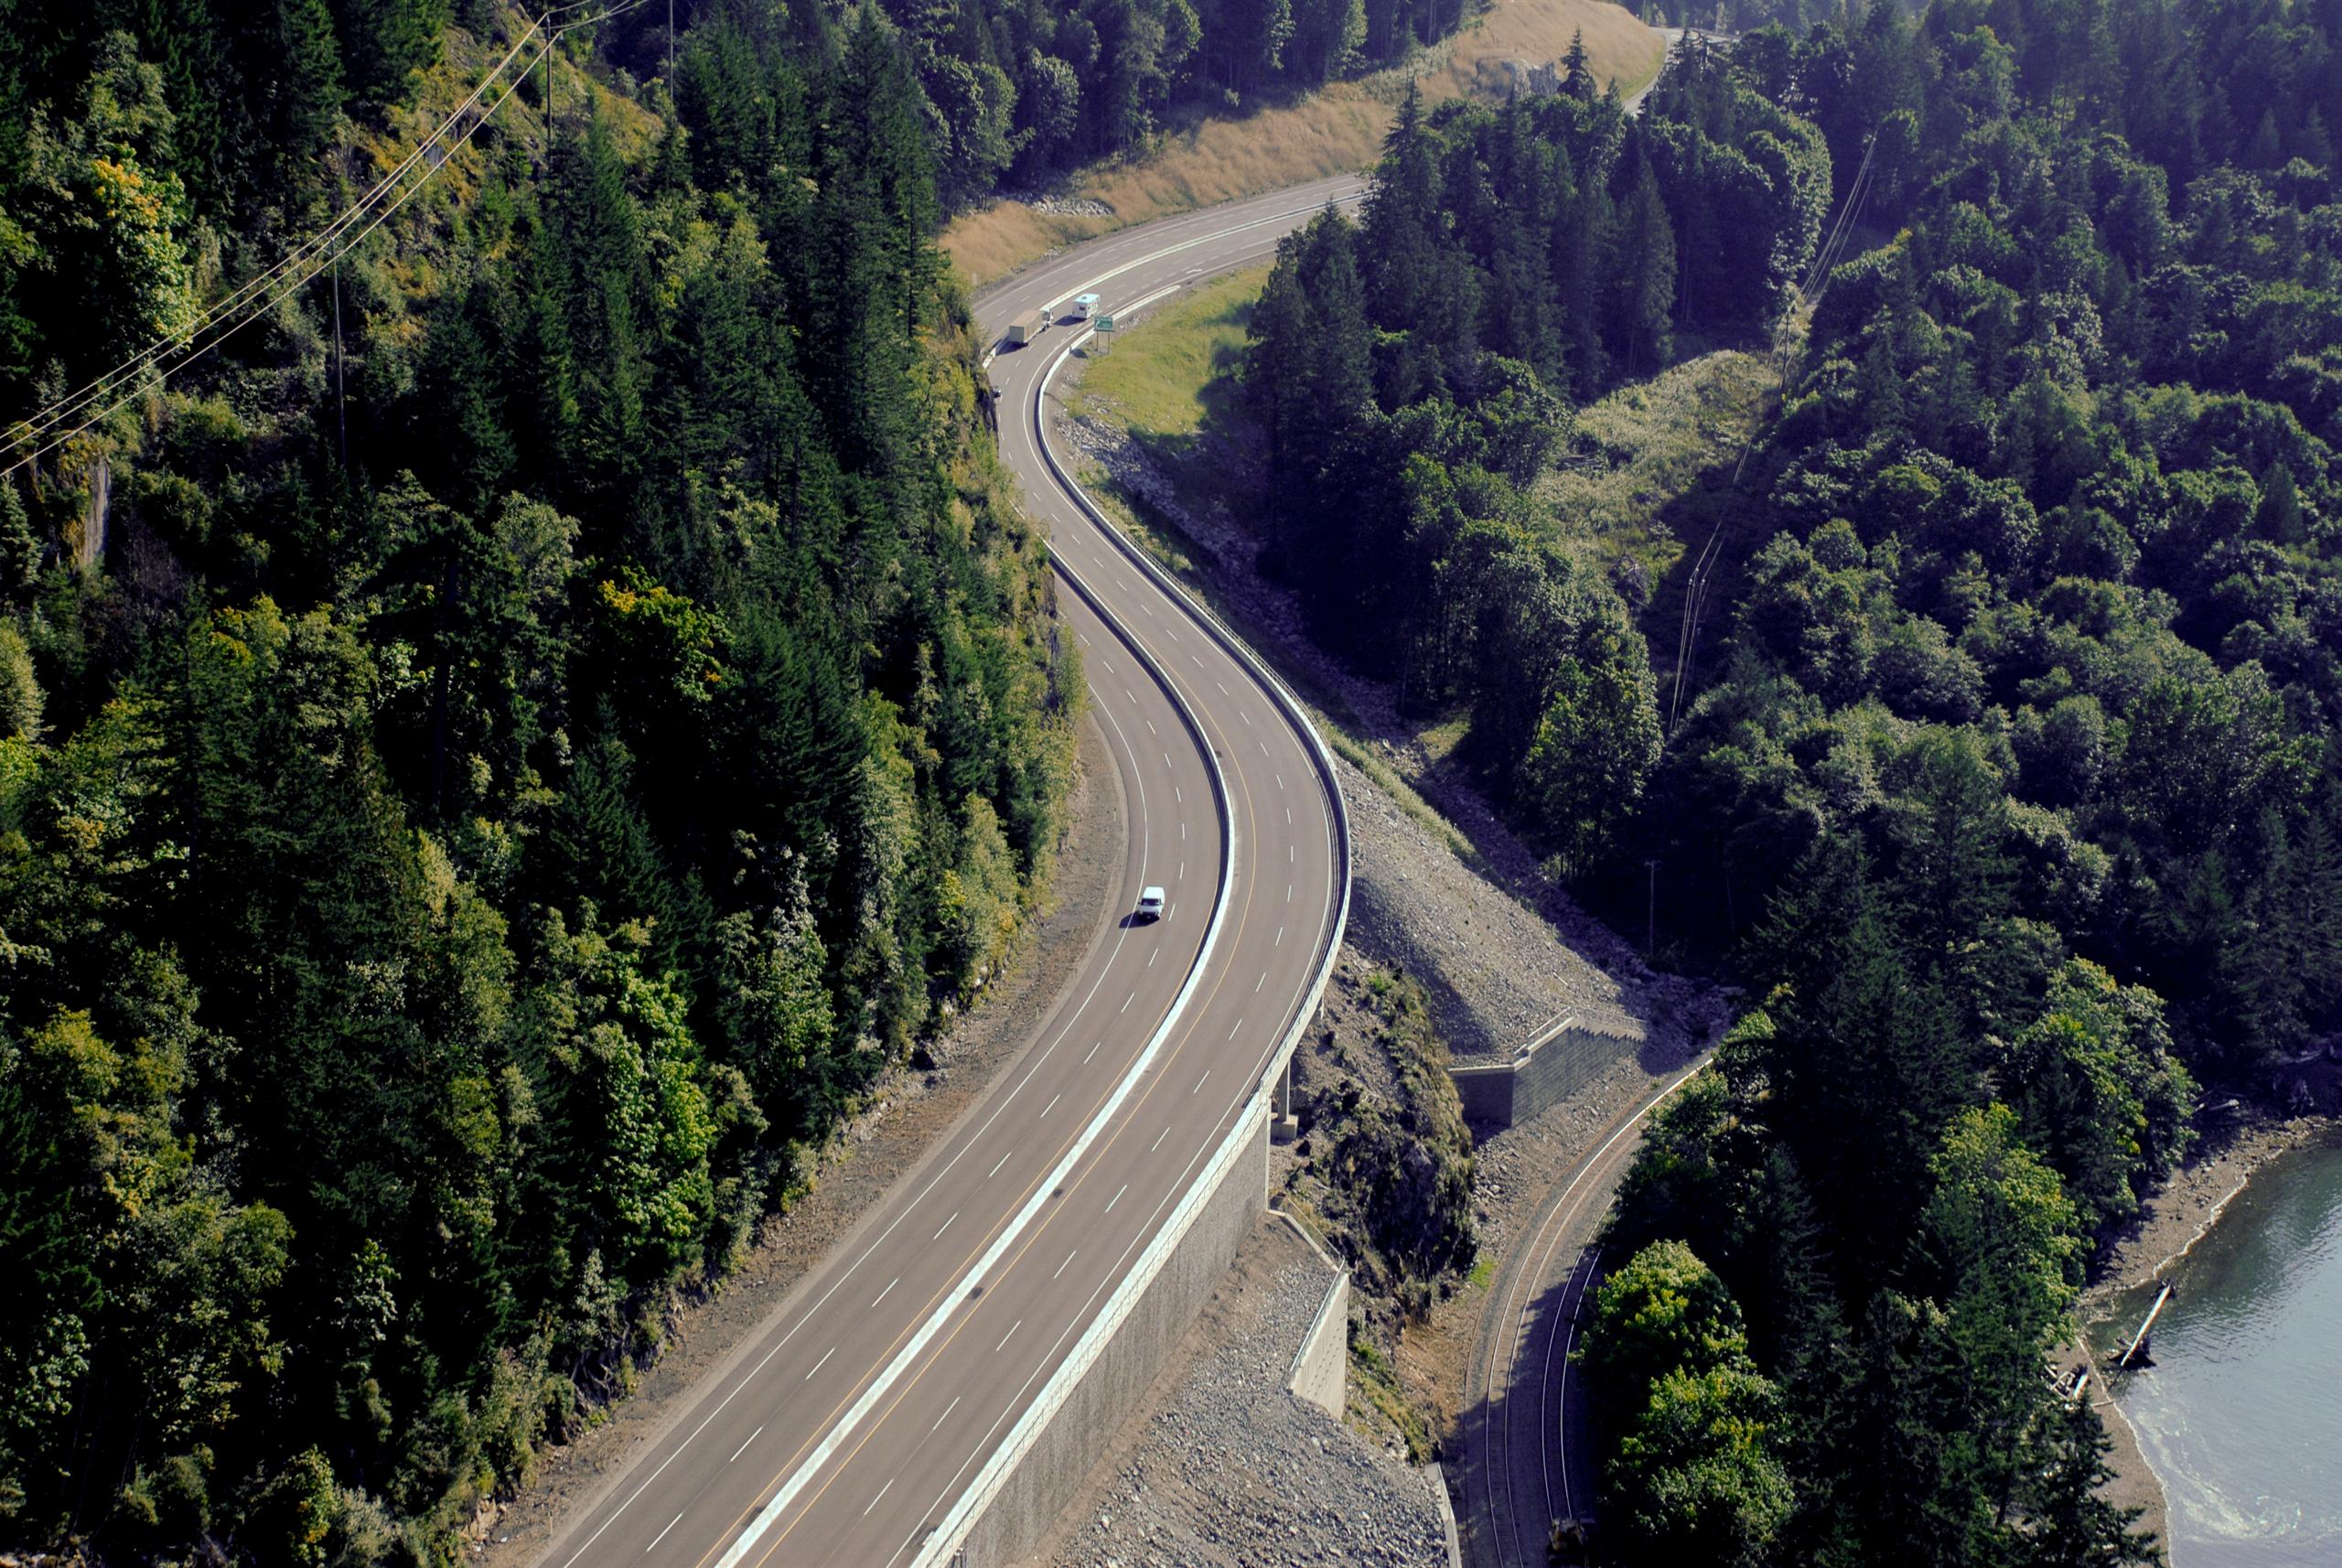 View of the main highway from above